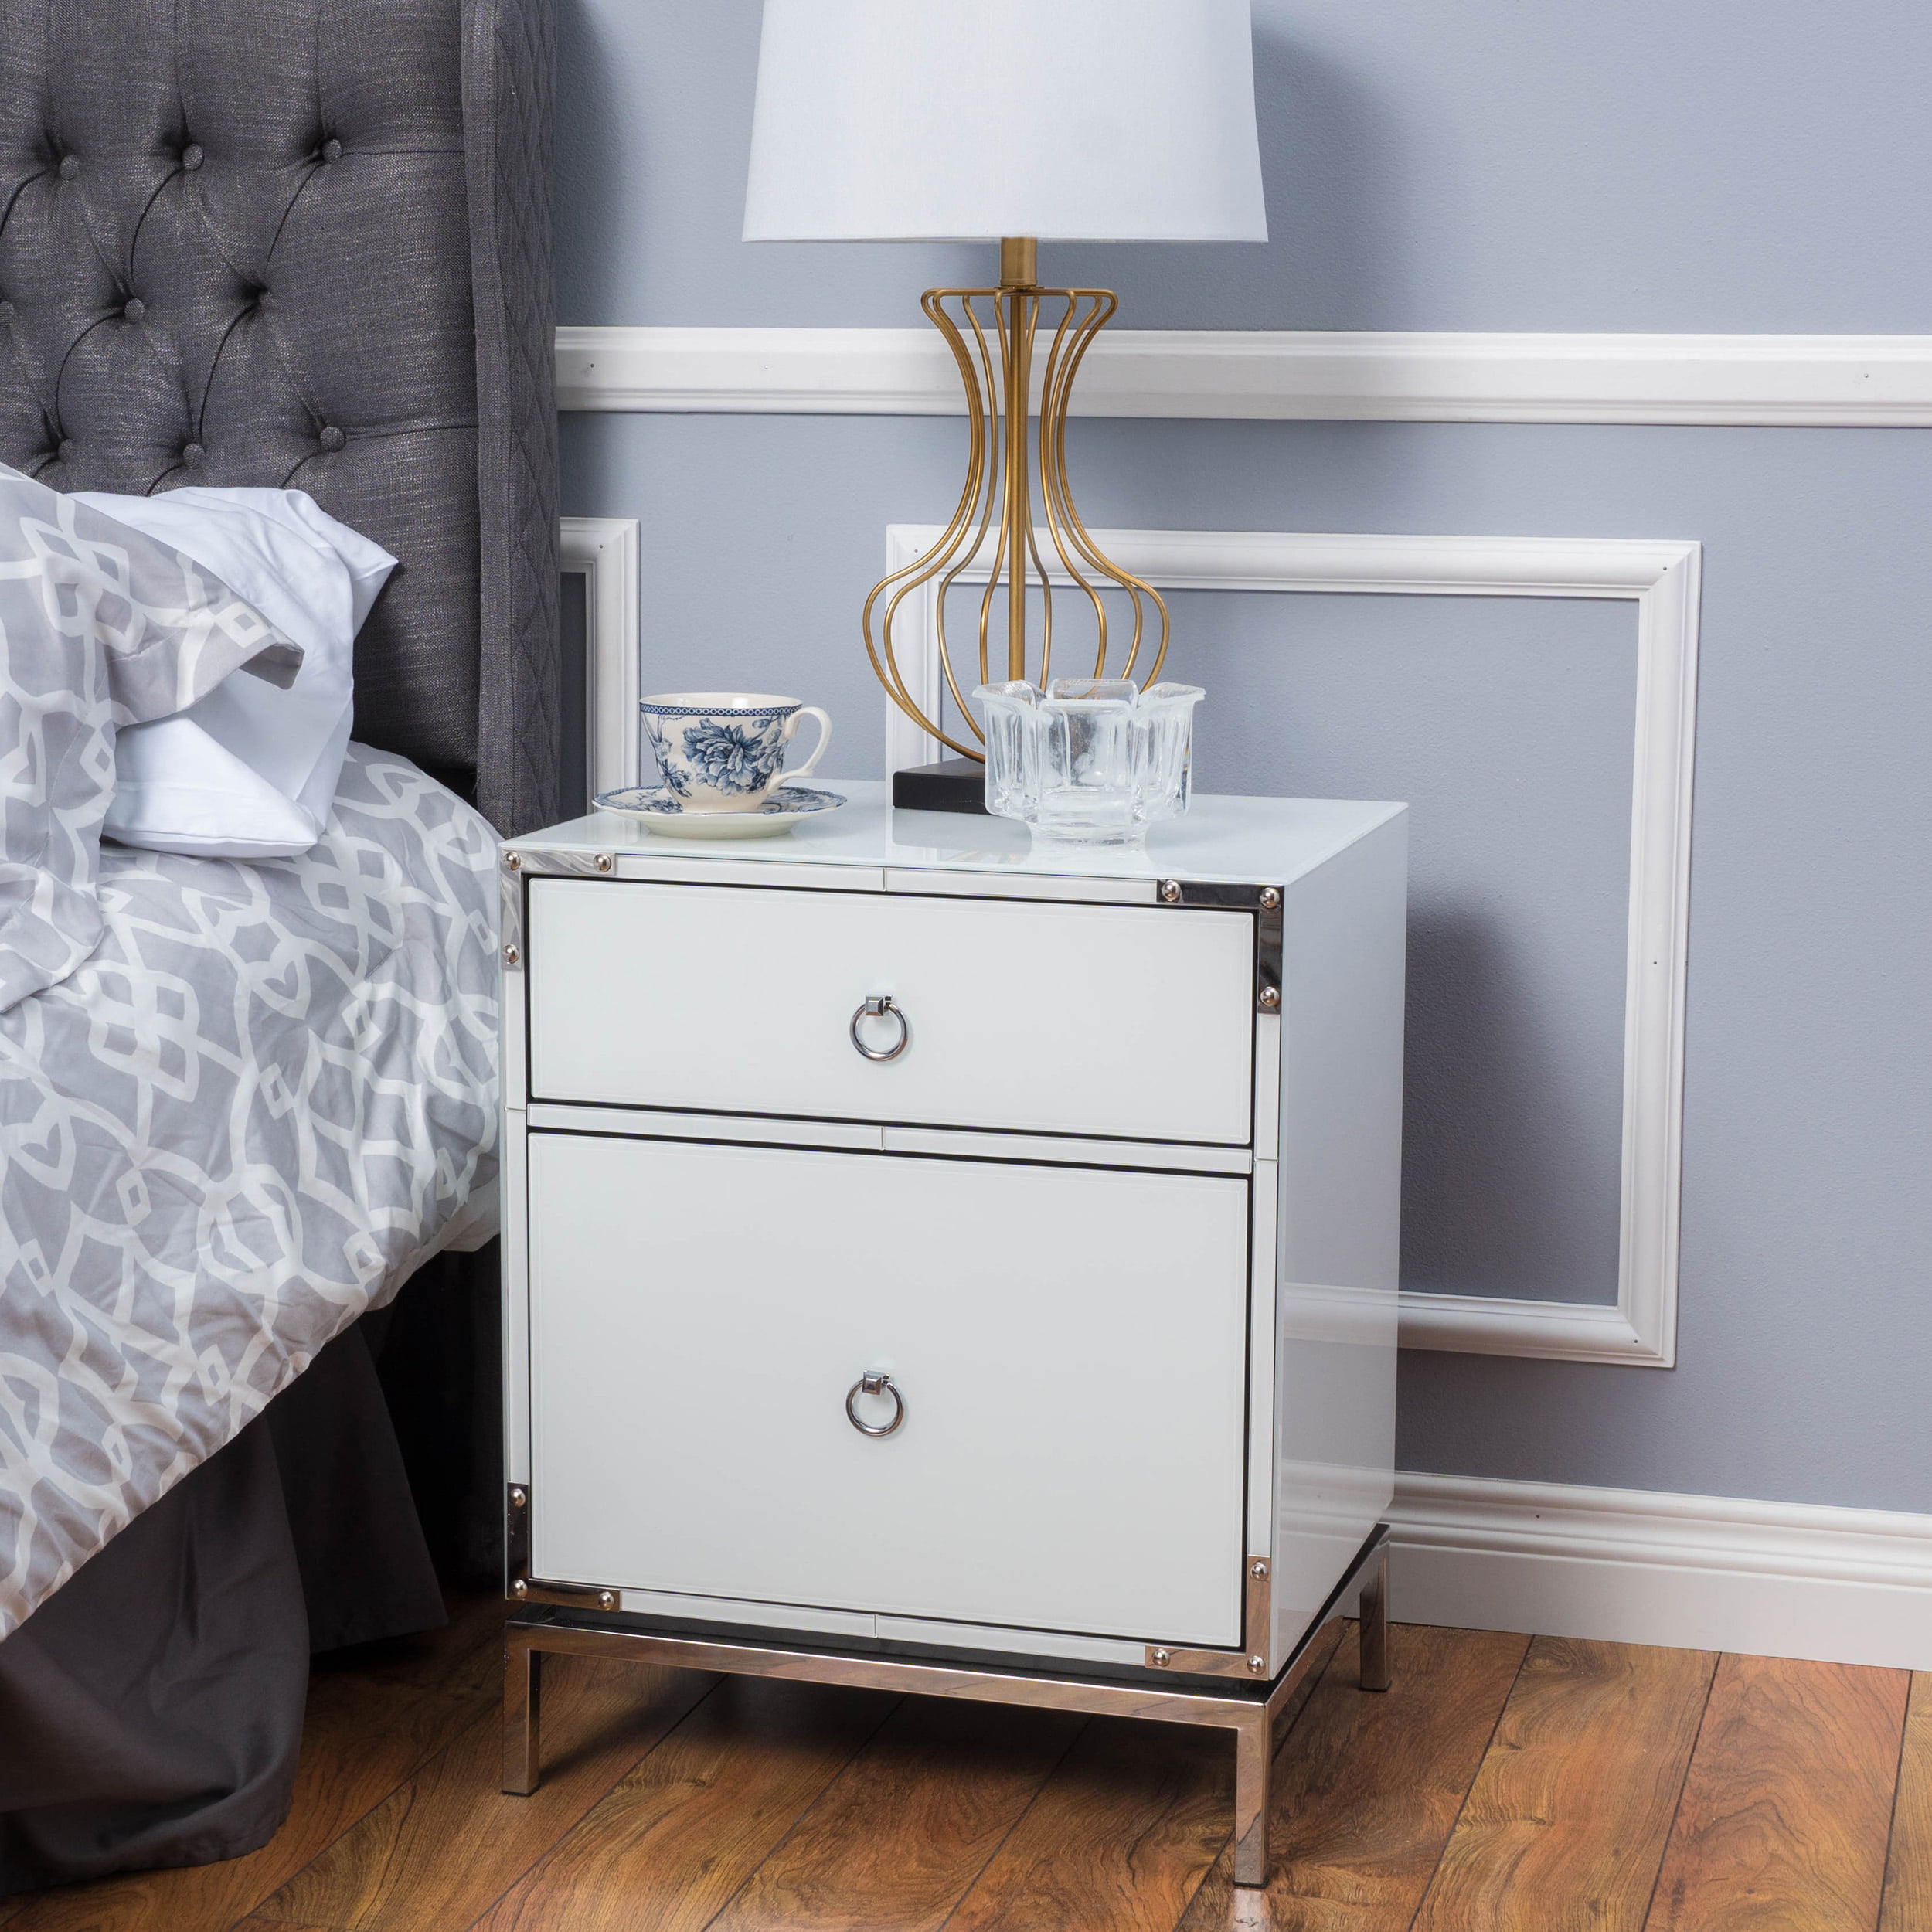 Details about   Danea White Glass 2 Drawer Bedside Table 